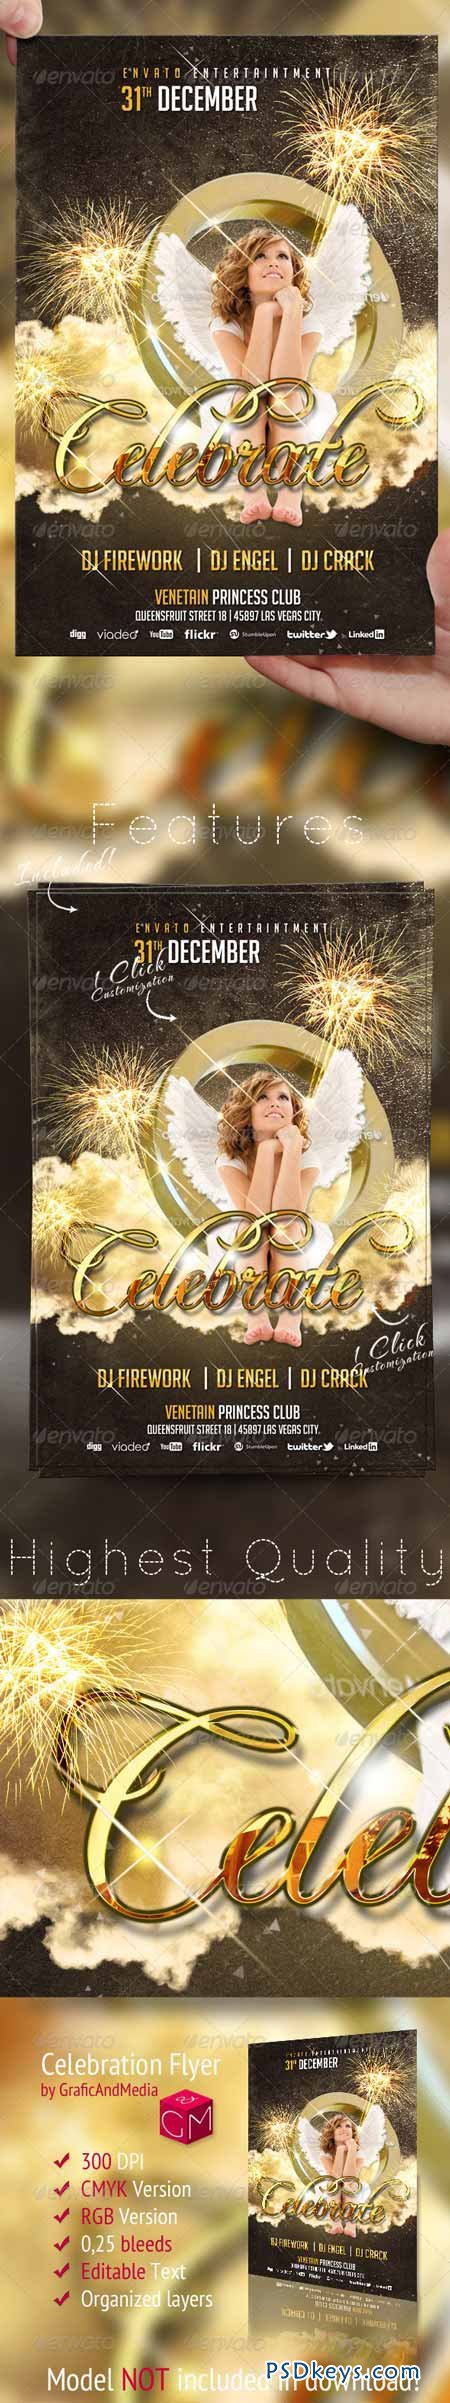 Celebrate Party Flyer Template 3389403